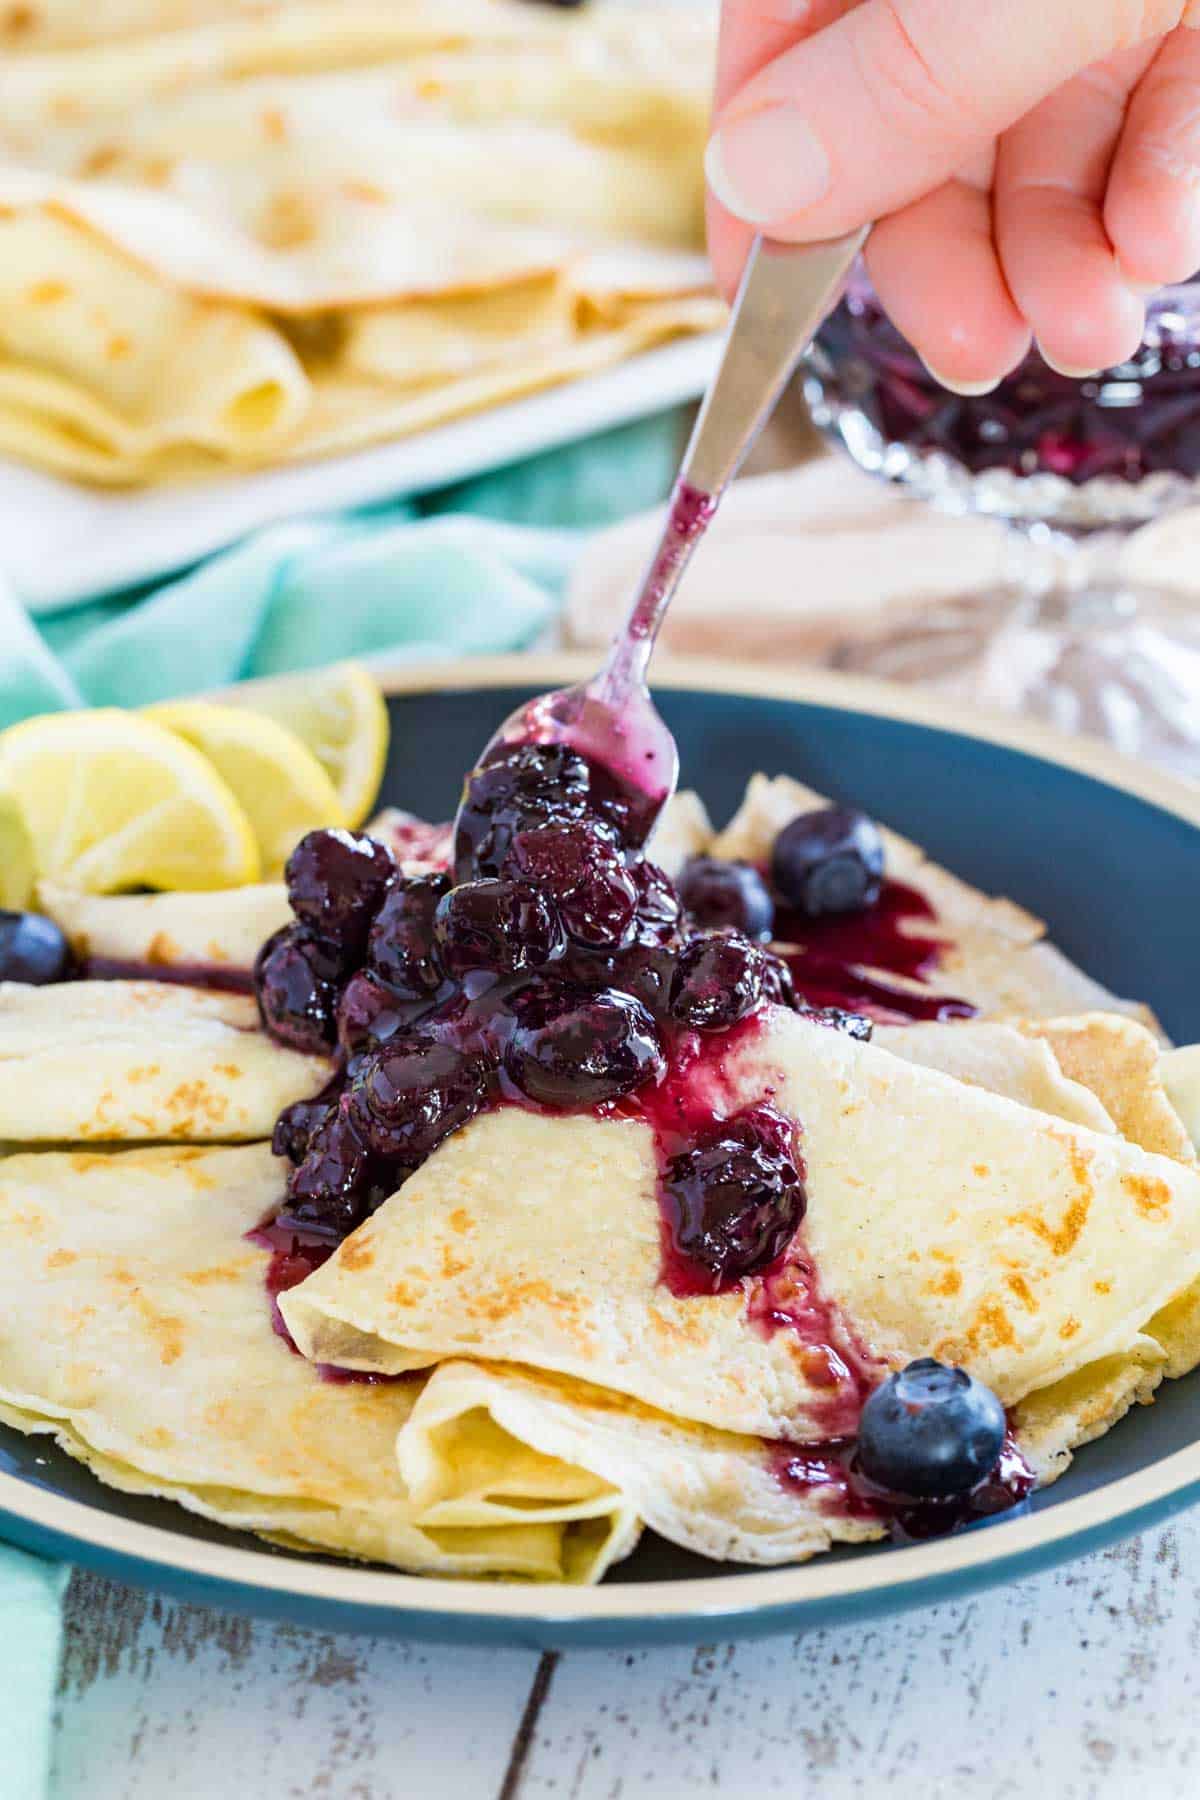 A plate of gluten-free crepes with homemade blueberry syrup being spooned on top of them